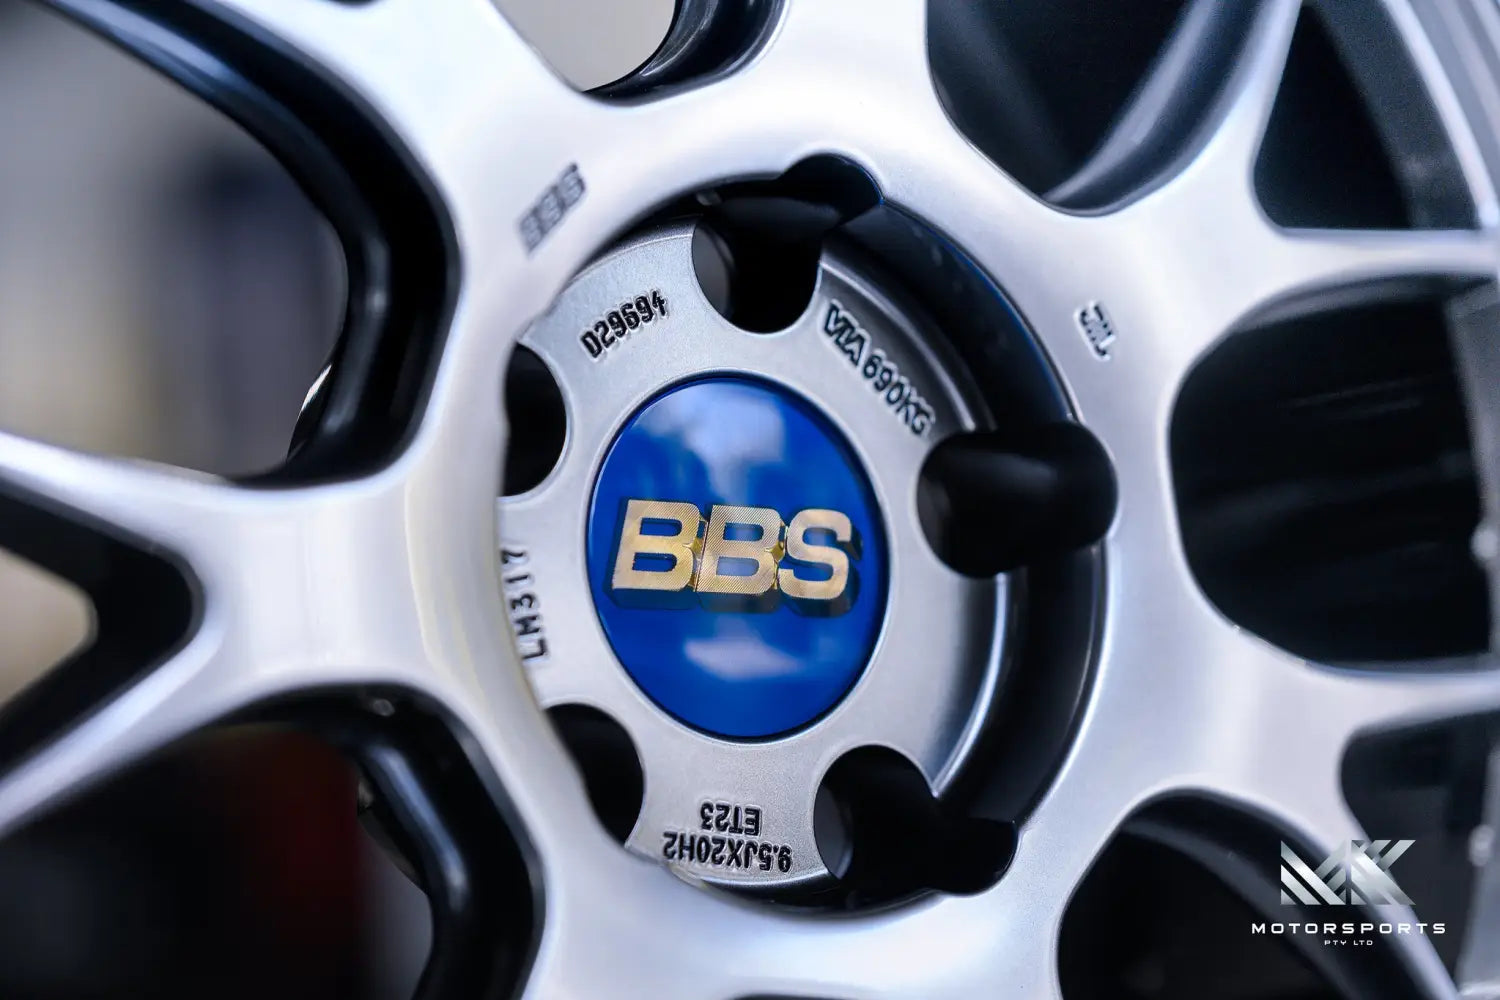 BBS Wheel Simulation App Available Now! – MK MOTORSPORTS